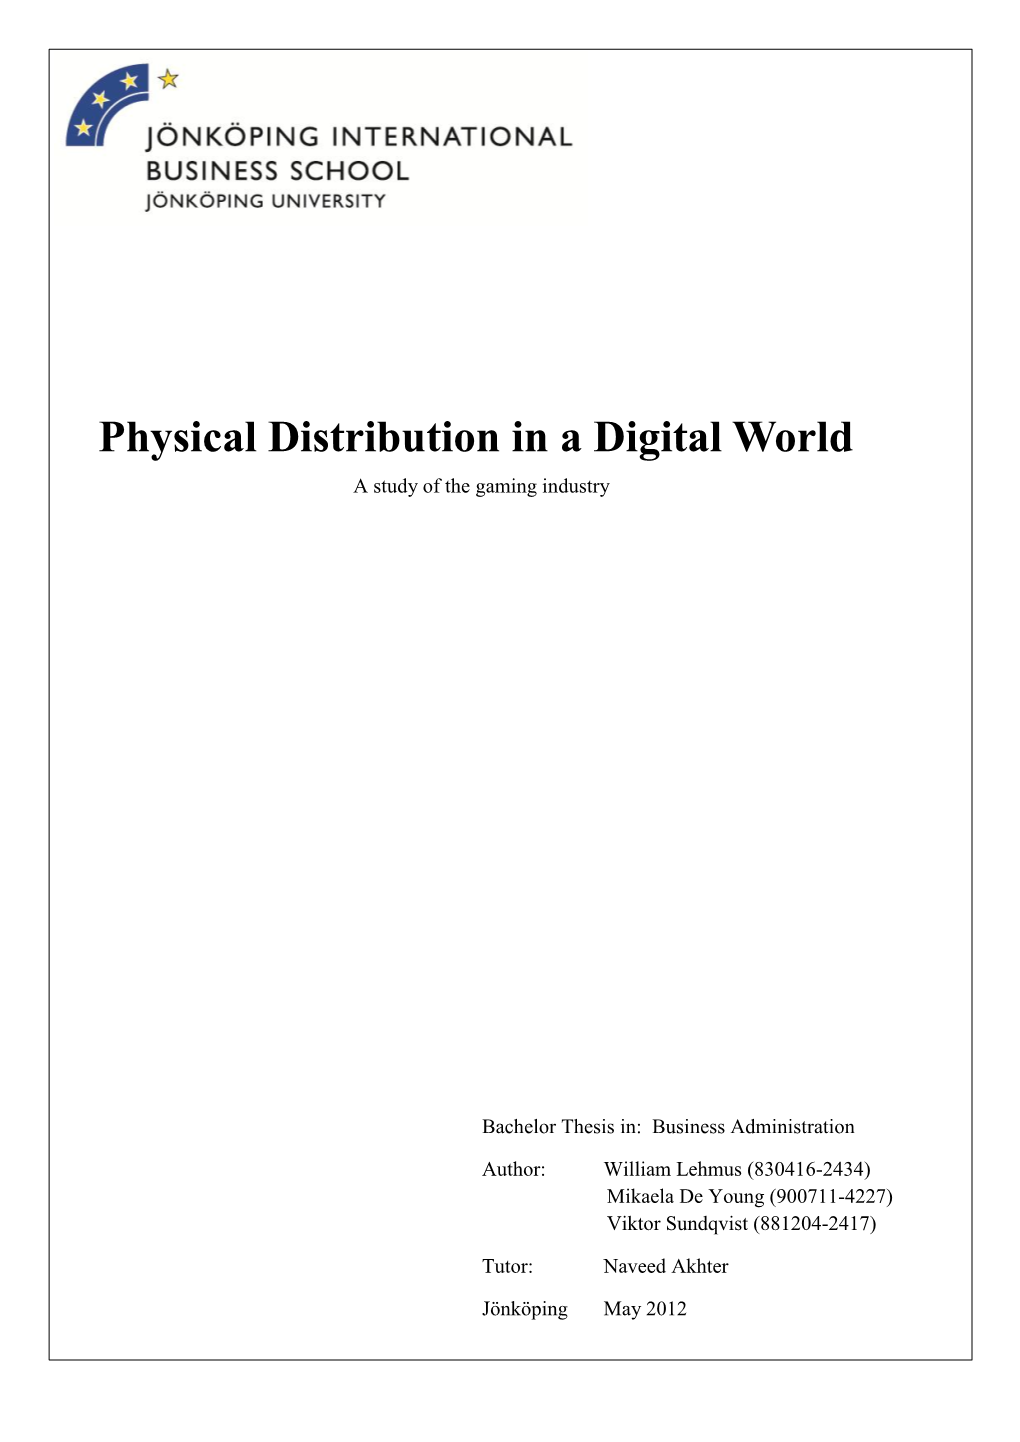 Physical Distribution in a Digital World a Study of the Gaming Industry